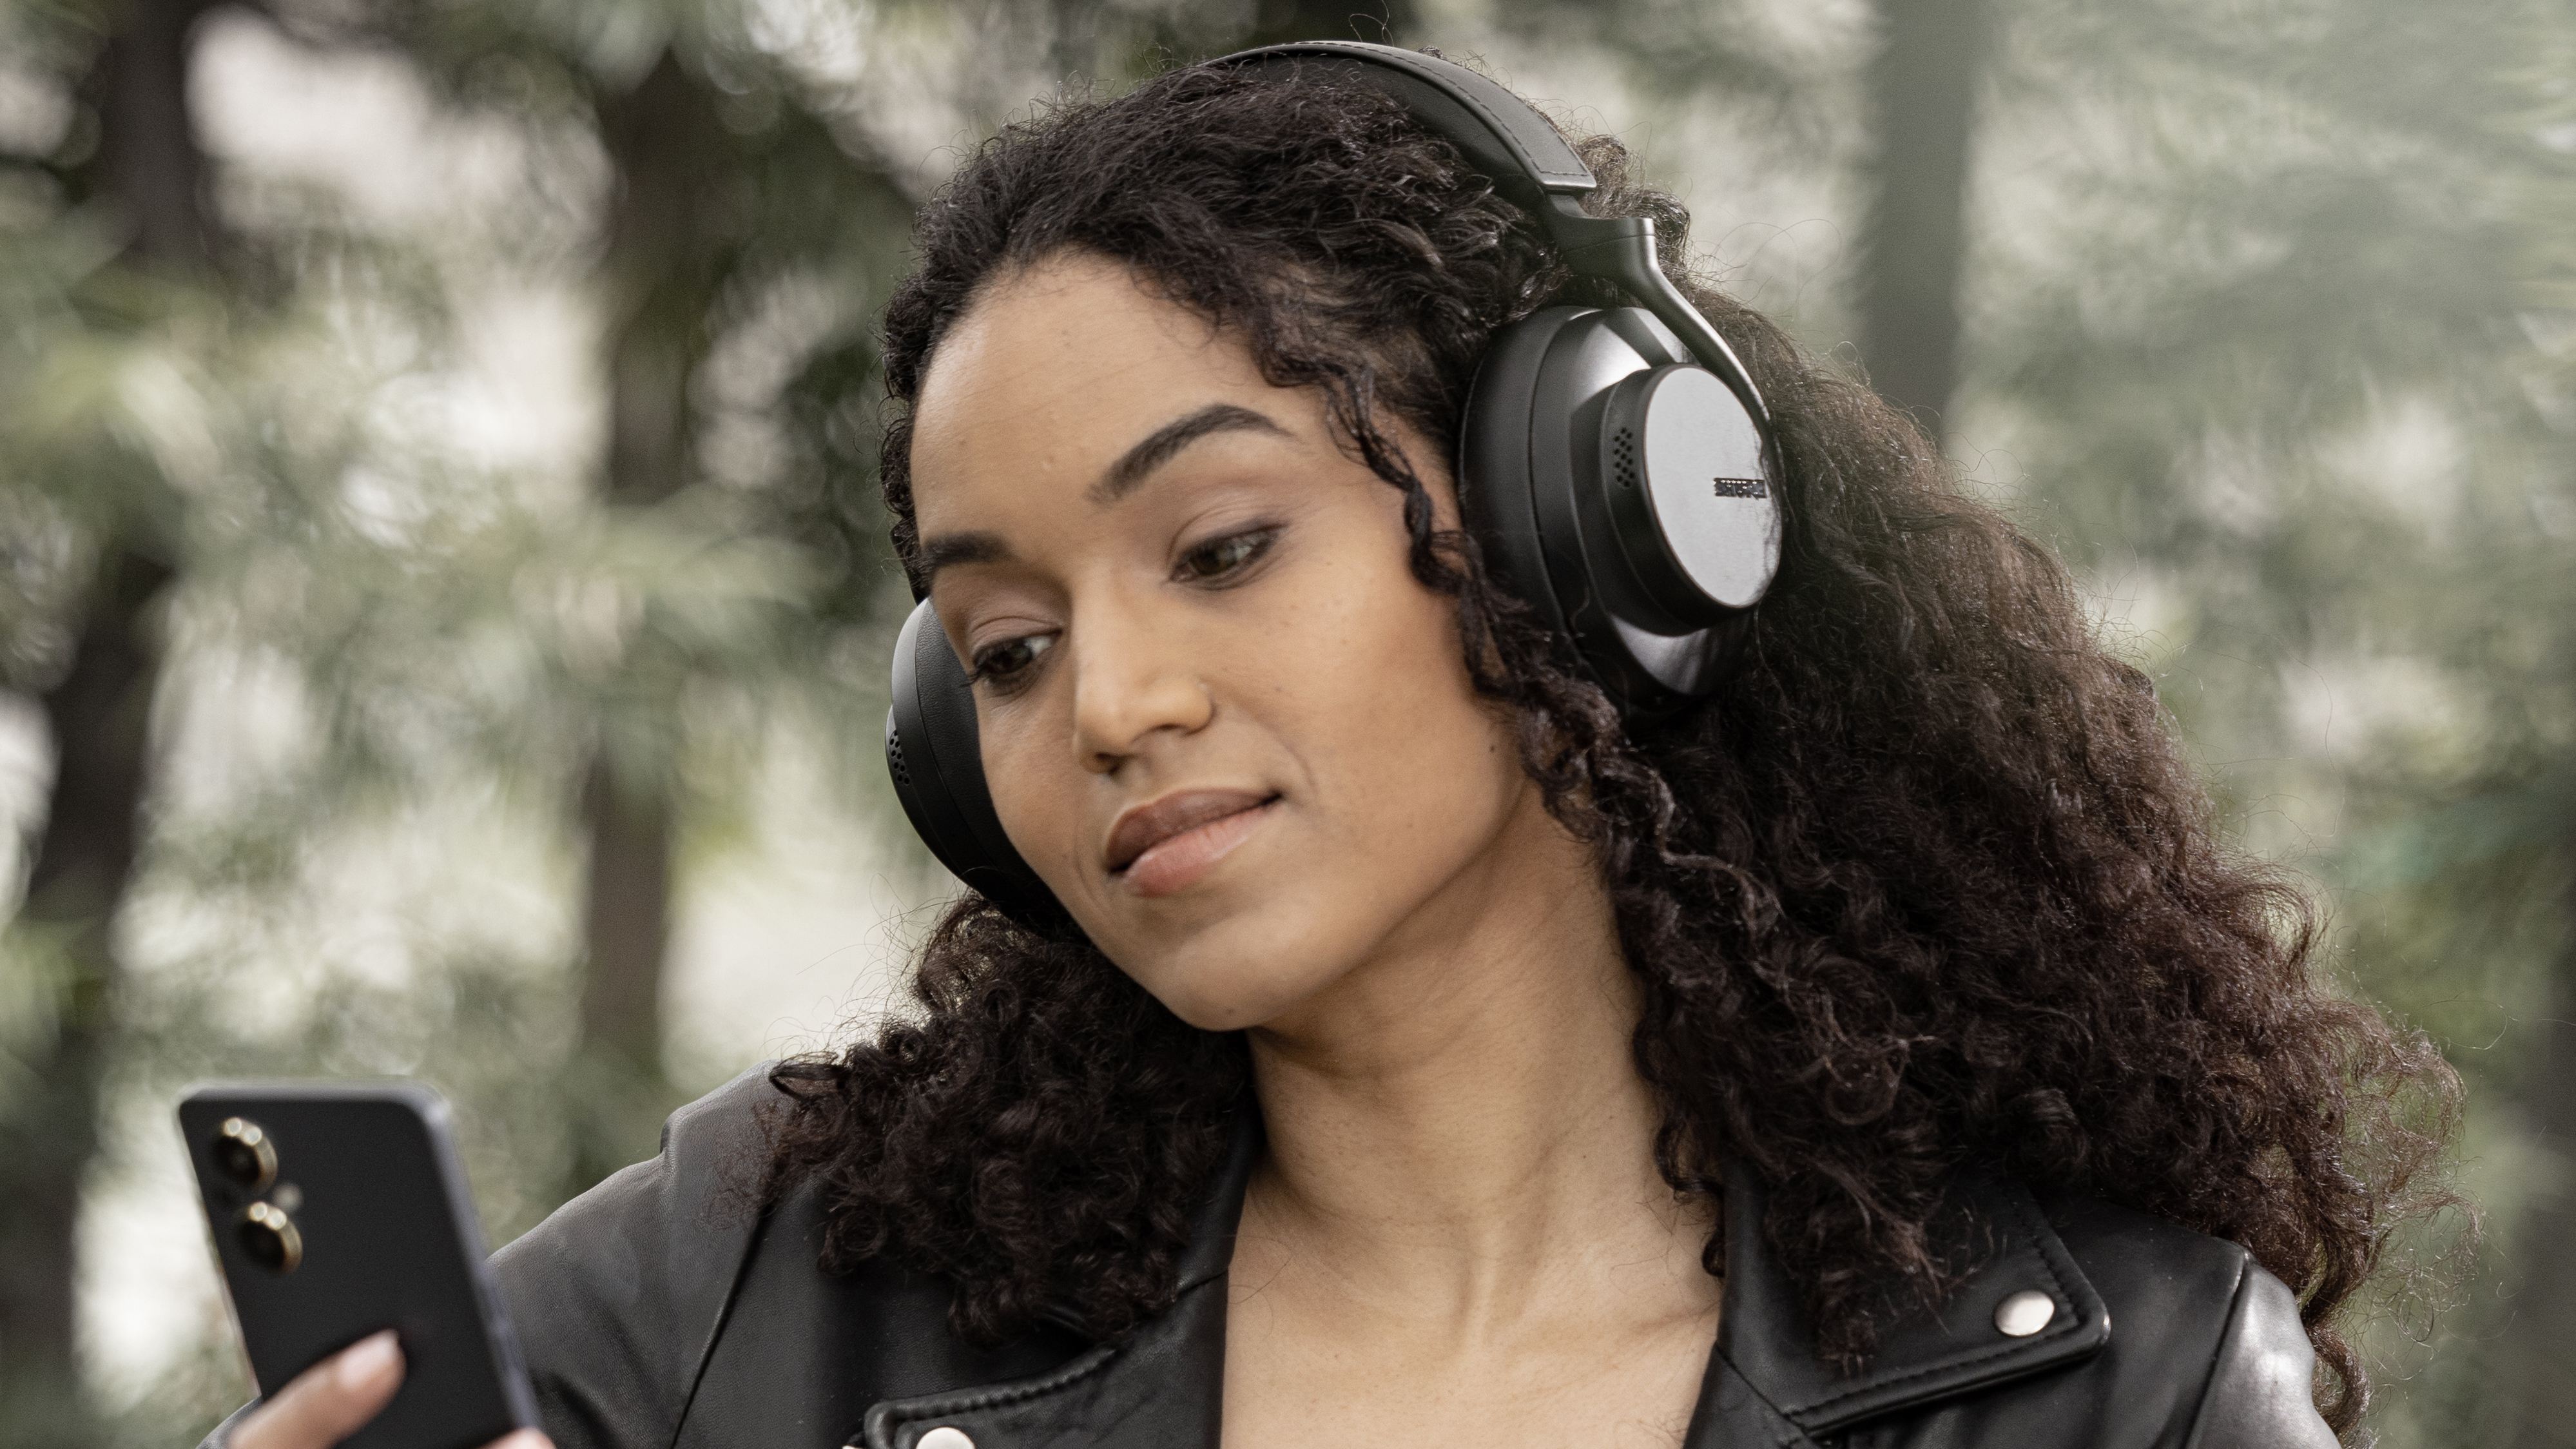 Shure AONIC Gen 2 worn by a womman outdoors who's looking at her phone